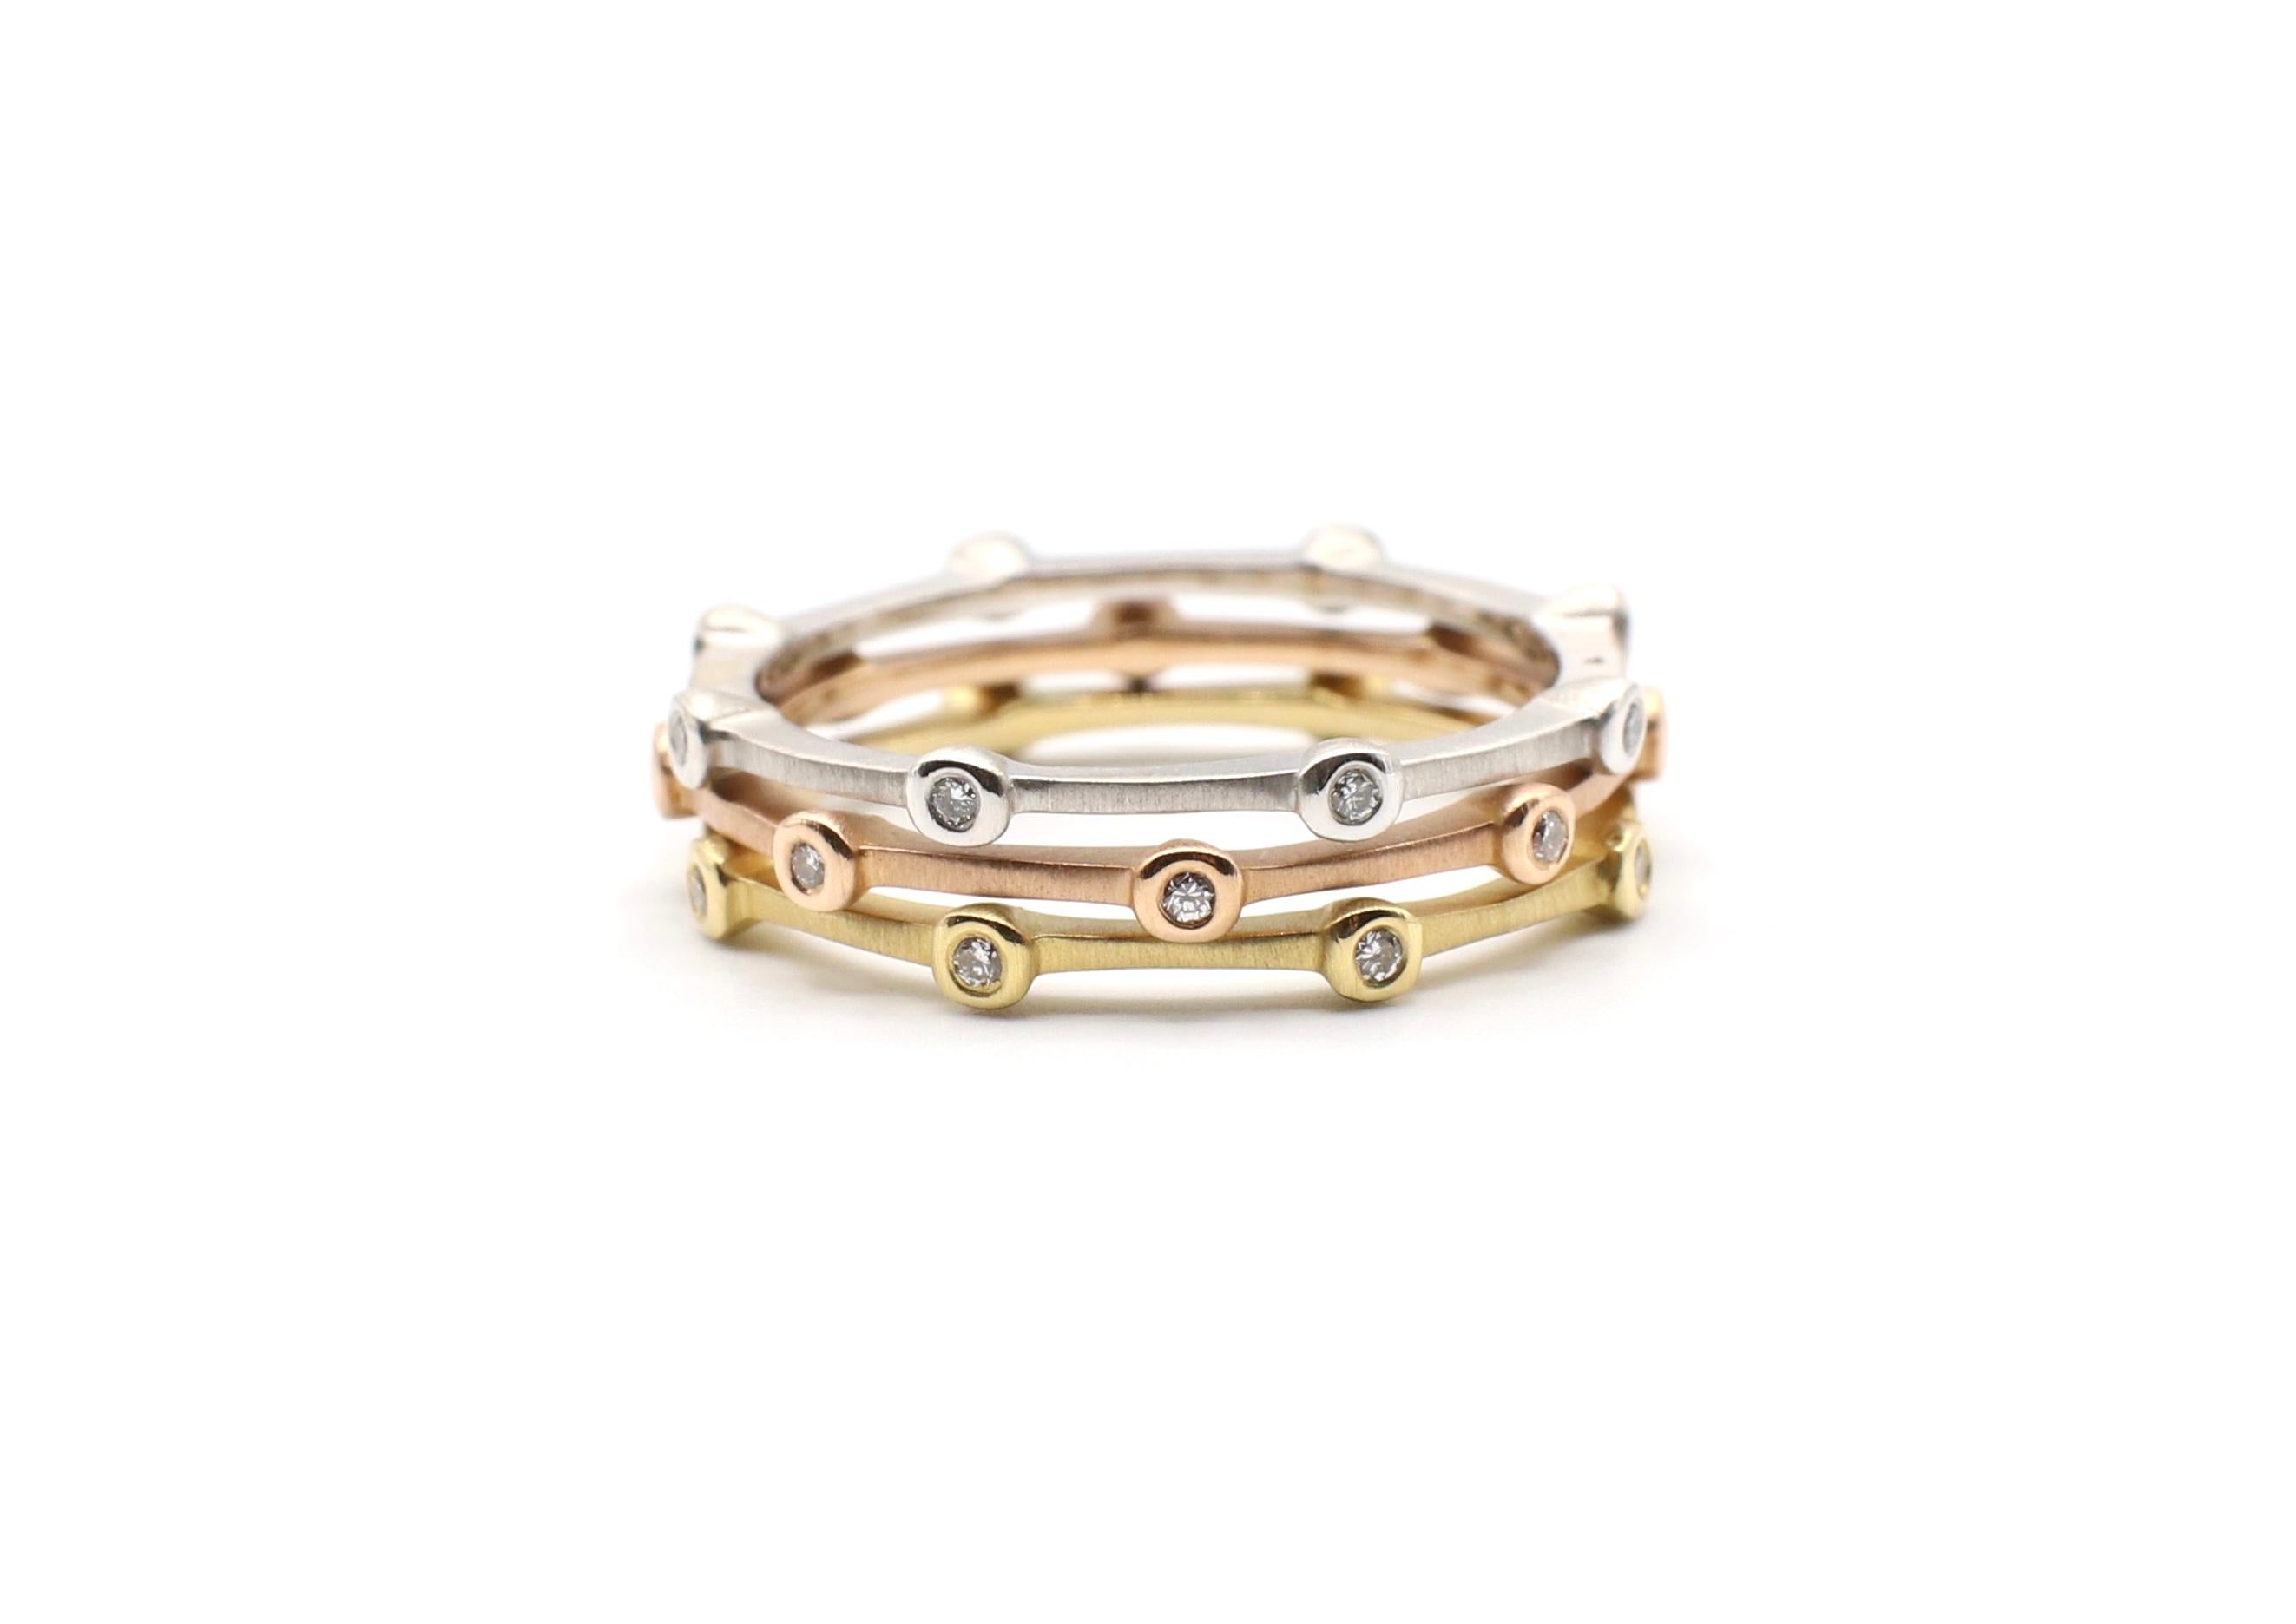 18K Tri-Color Natural Diamond Bamboo Style Stacking Ring Set of 3 Size 8.75

Metal: 18K white, rose & yellow gold
Weight: 6.04 grams
Diamonds: 24 round brilliant cut natural diamonds bezel set, approx. .25 ctw G VS 
3 Rings
Size: 8.75
Bands are 1mm